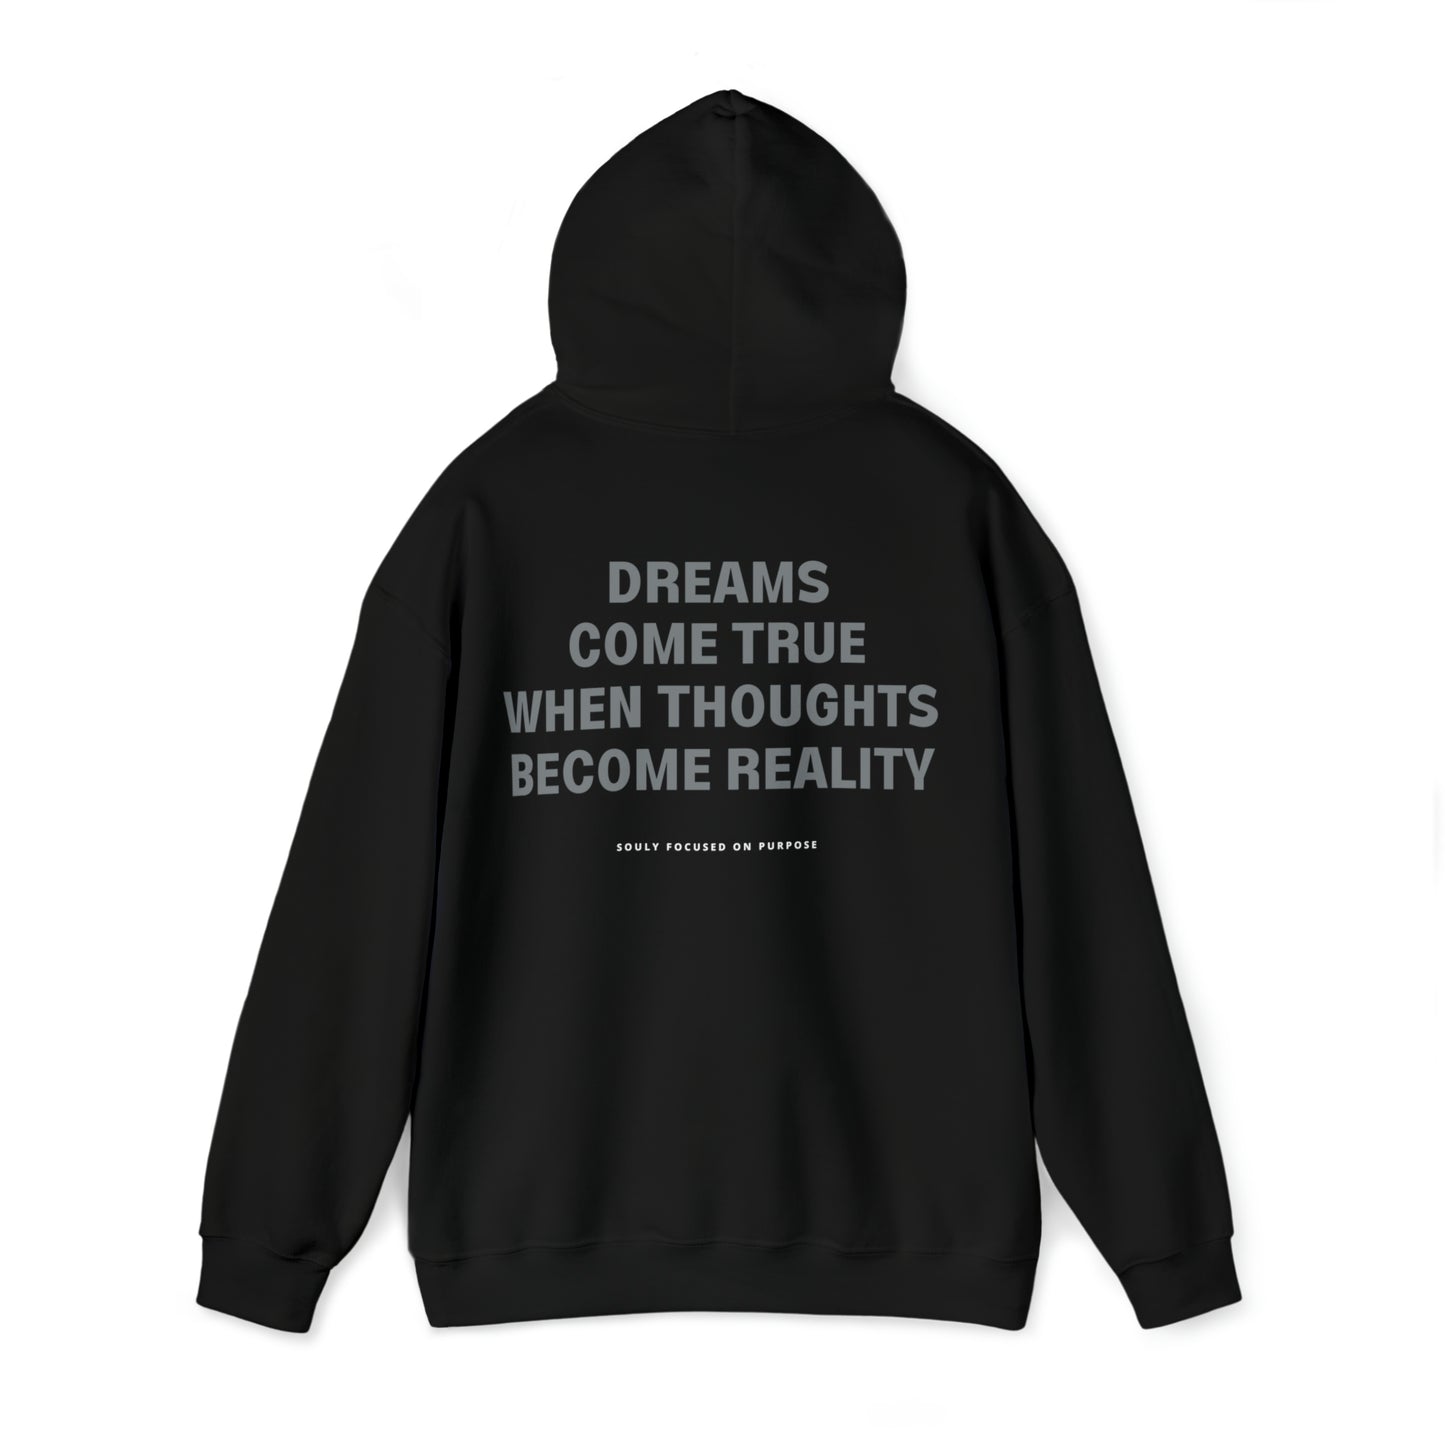 Dreams Come True When Thoughts Become Reality Hoodie